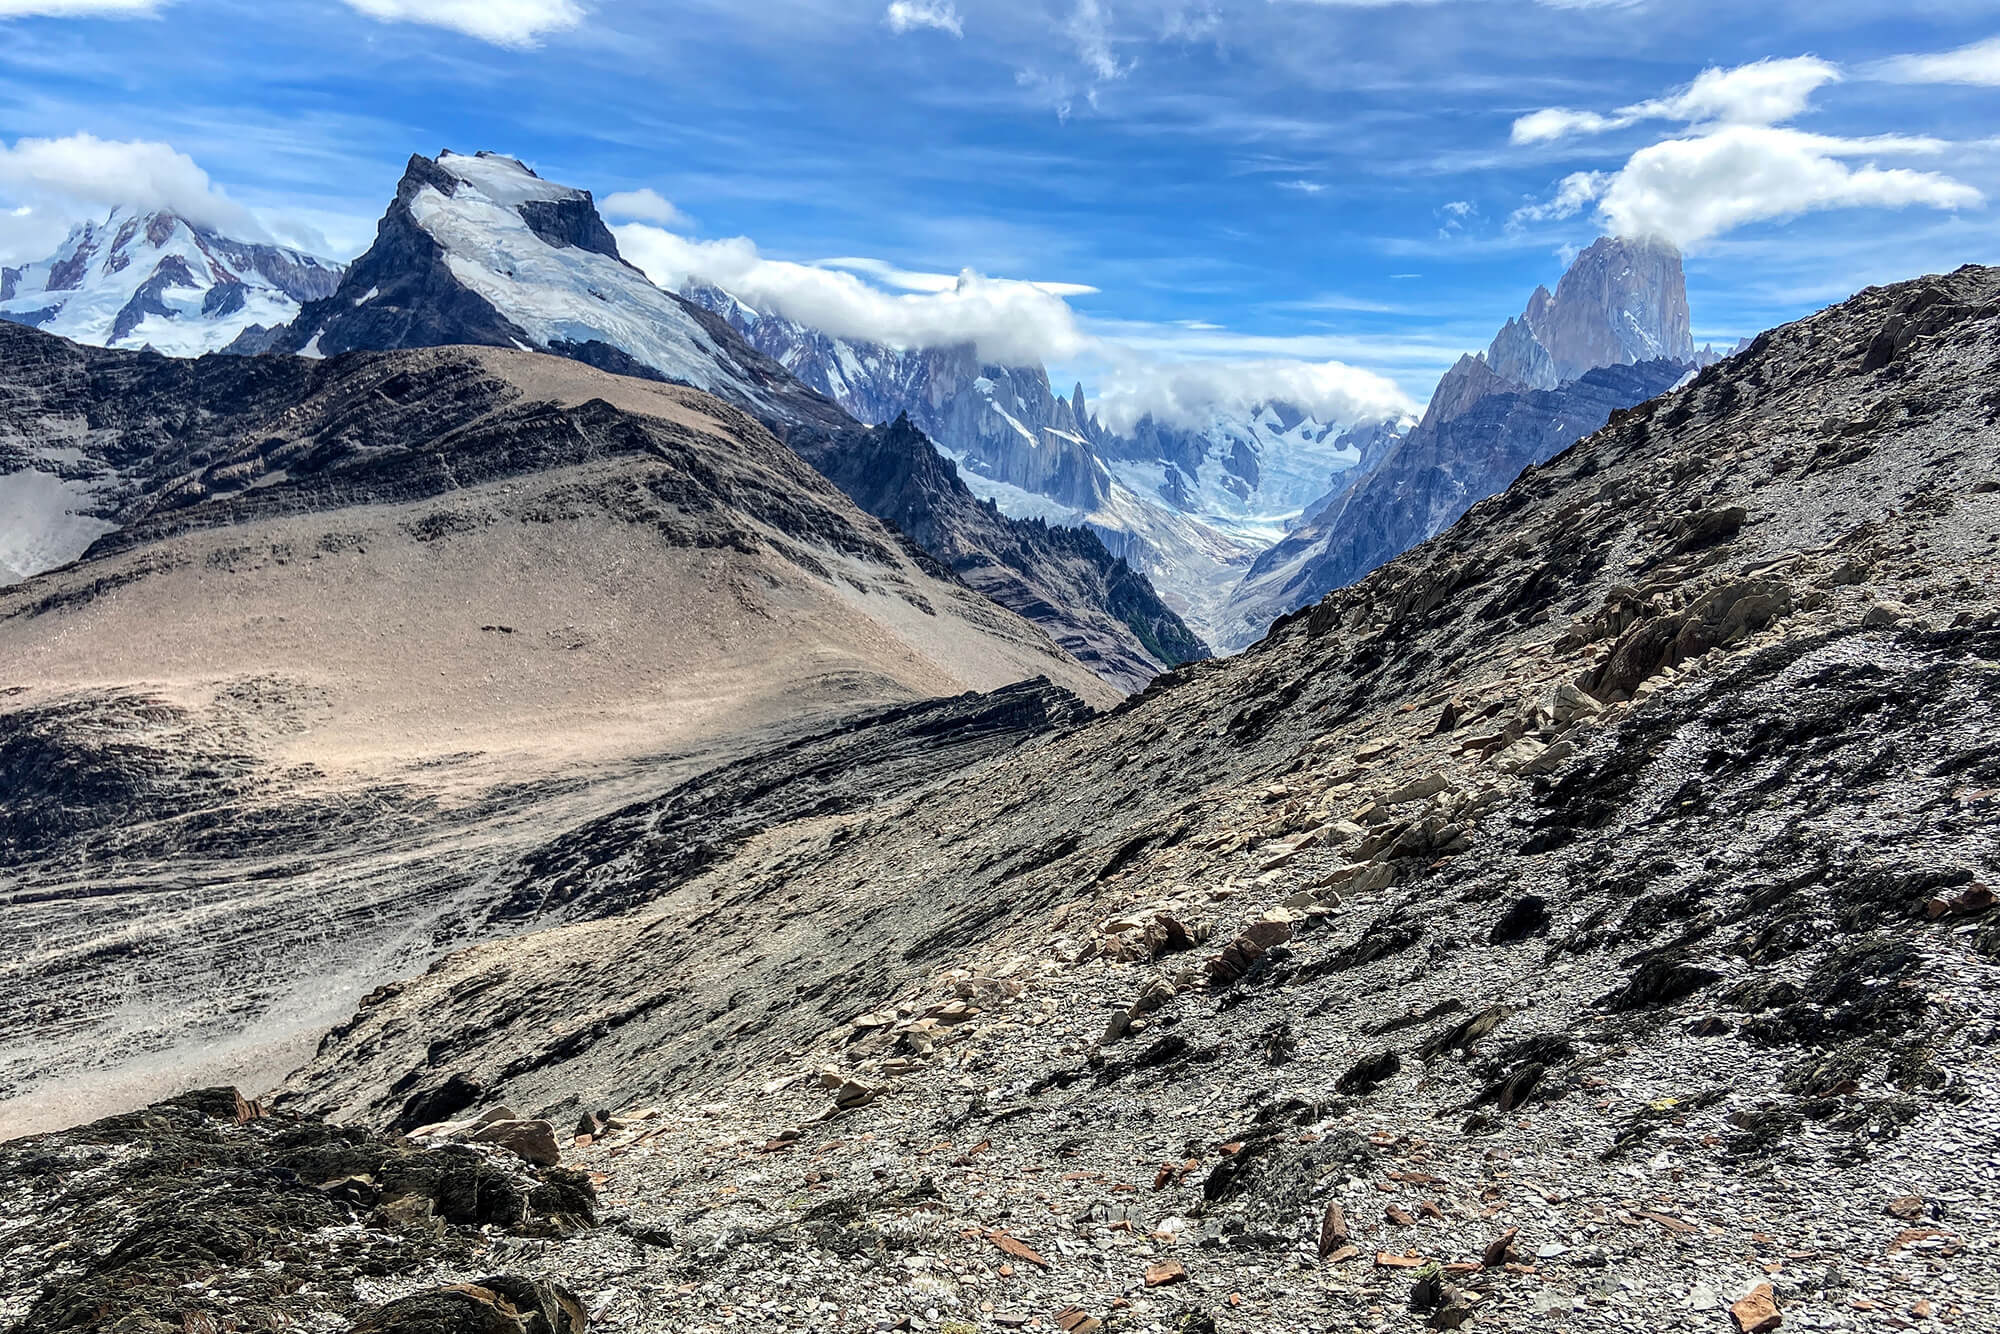 Beyond the Fitz Roy range - Serac Expeditions